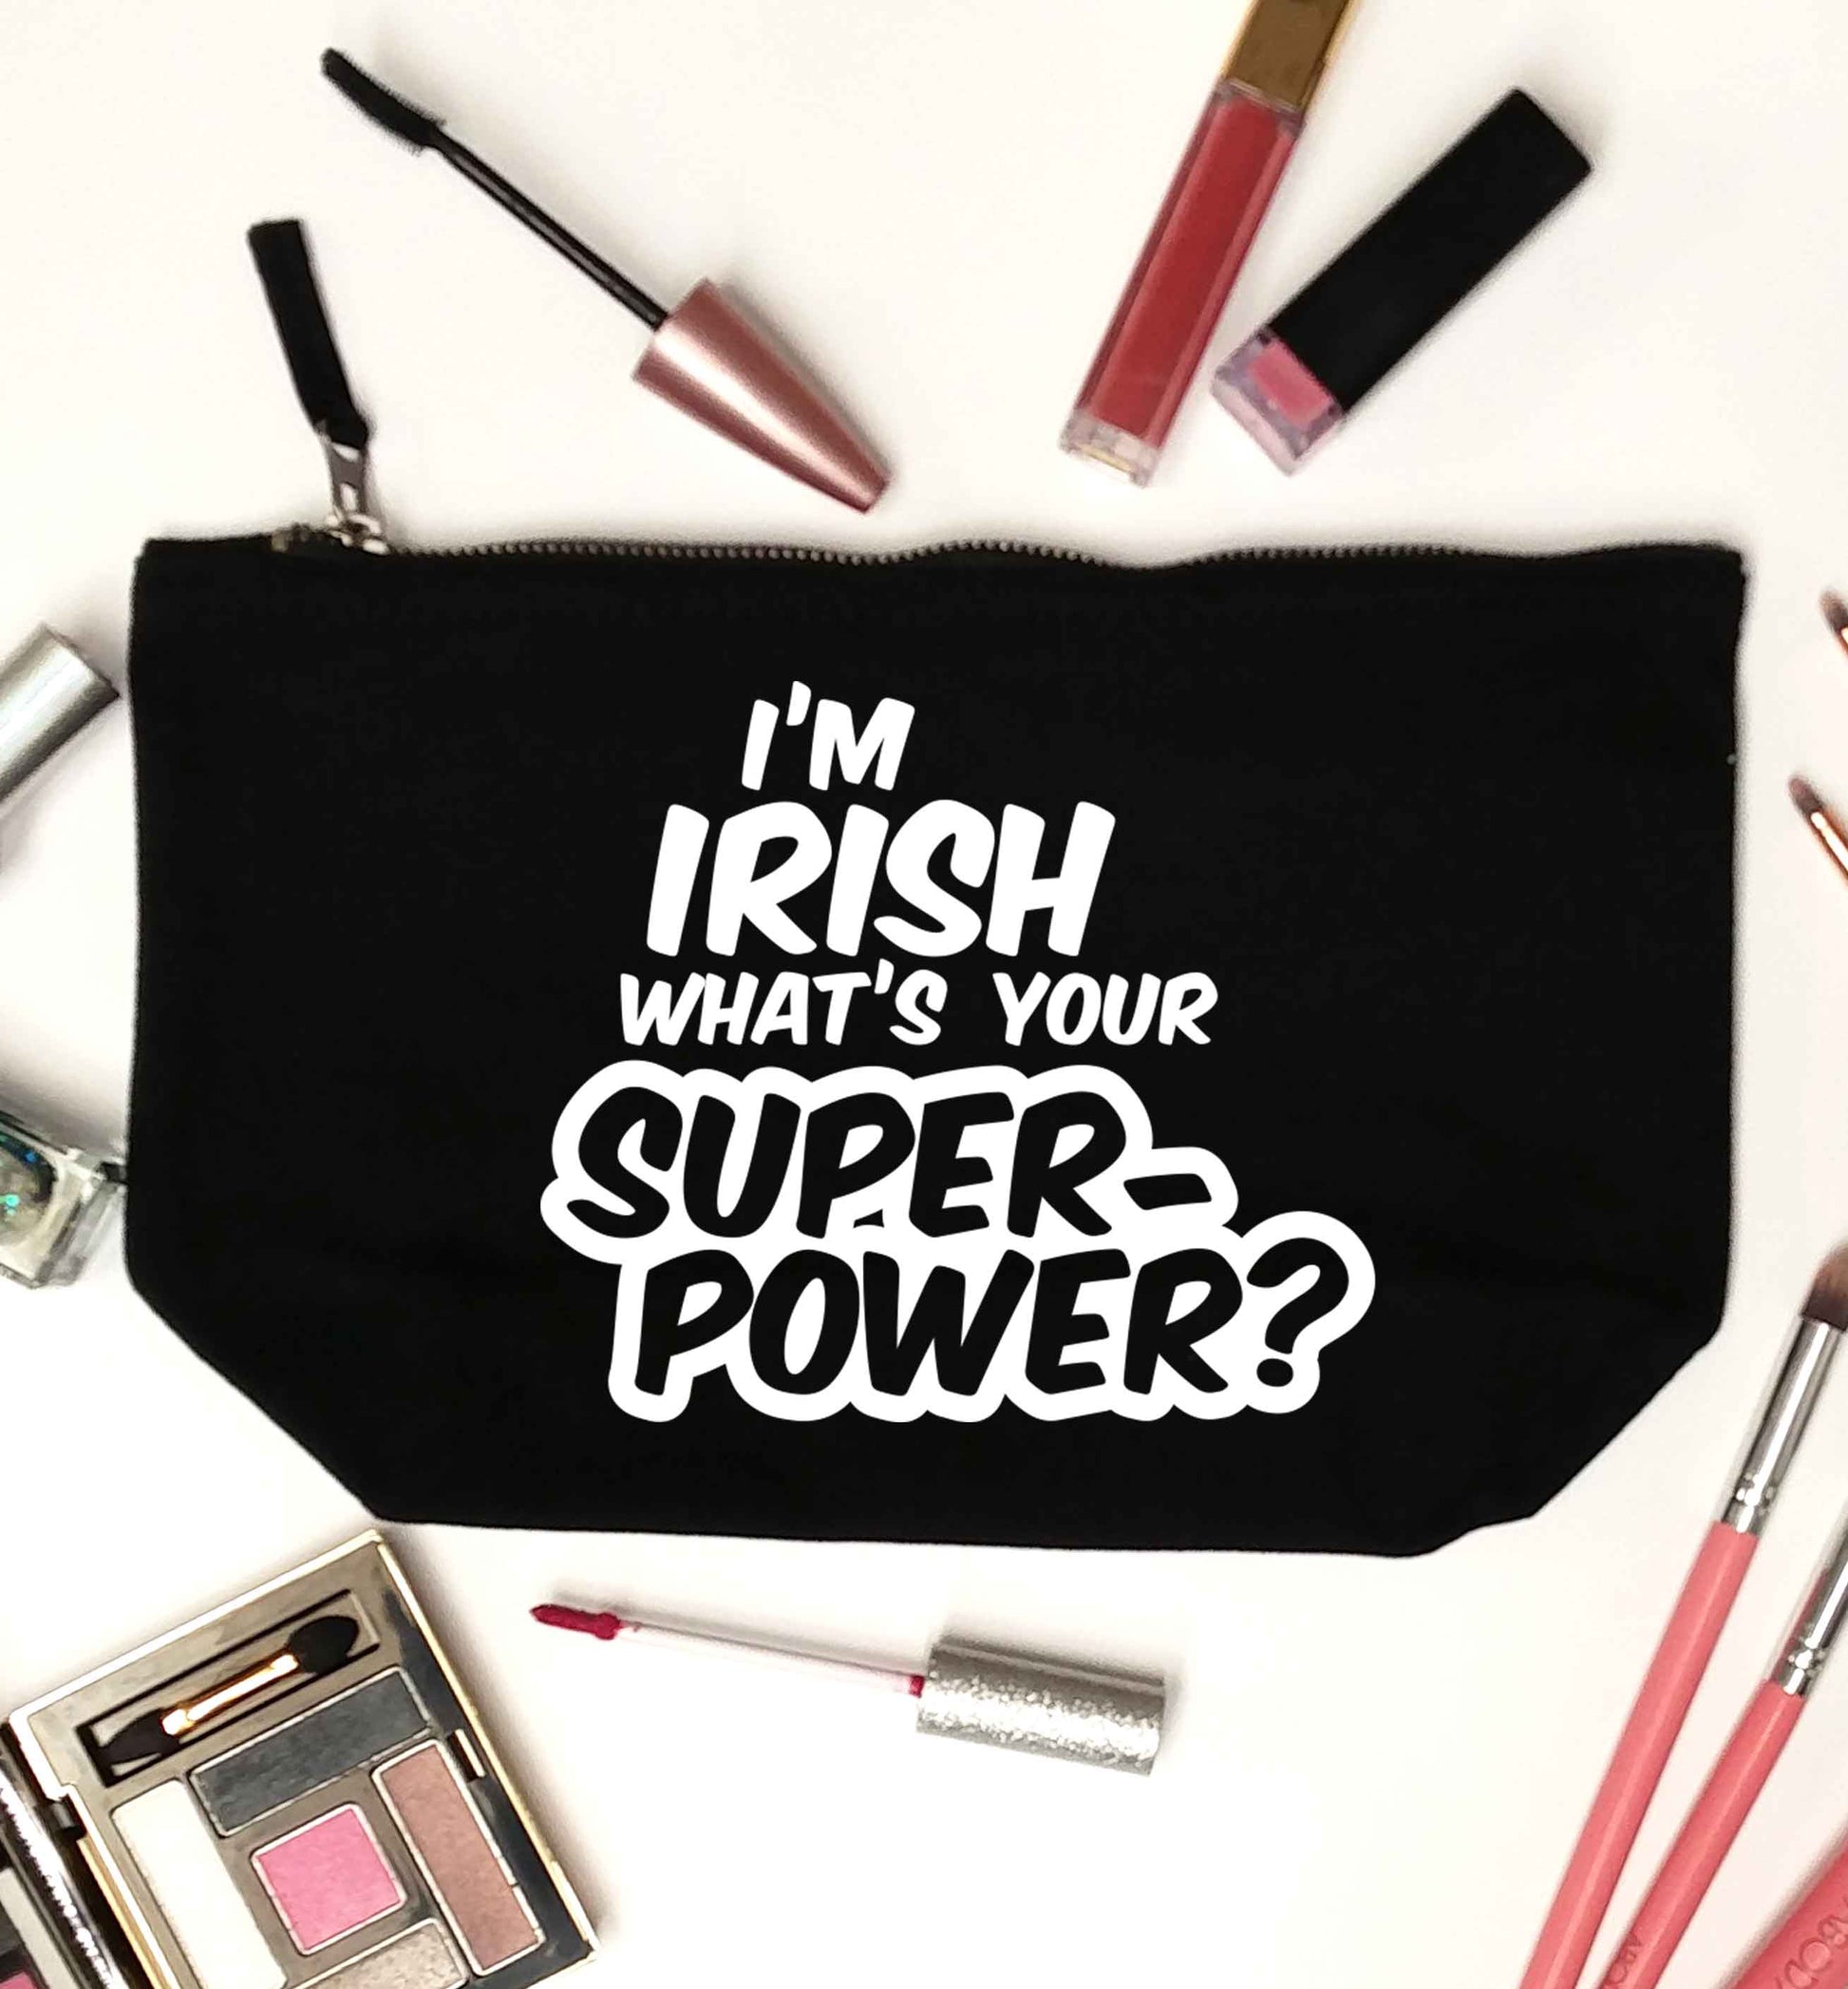 I'm Irish what's your superpower? black makeup bag